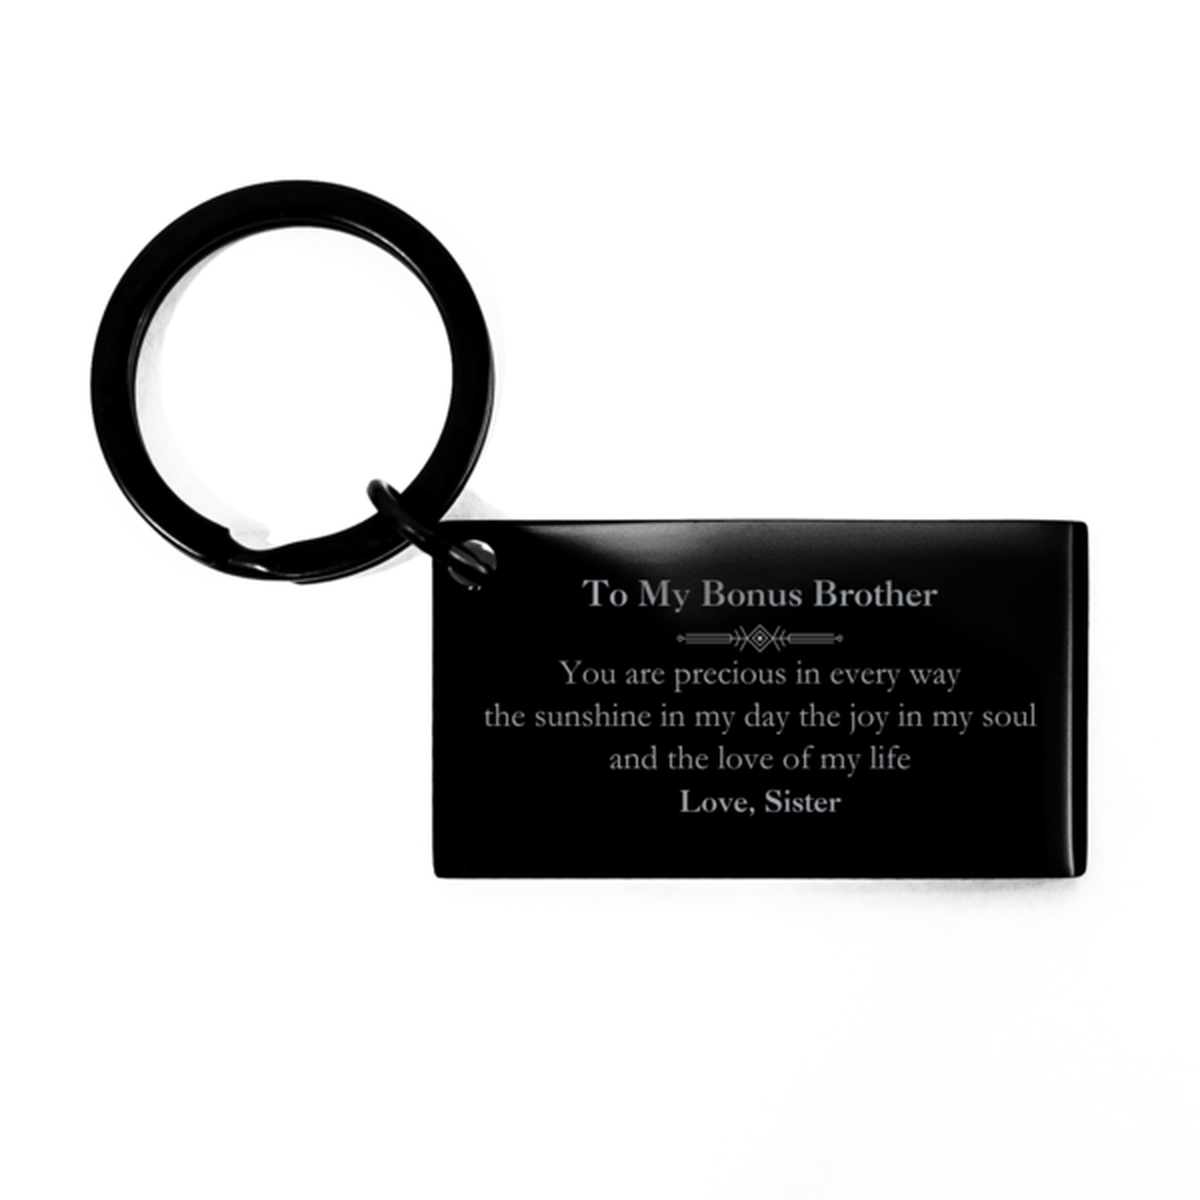 Graduation Gifts for Bonus Brother Keychain Present from Sister, Christmas Bonus Brother Birthday Gifts Bonus Brother You are precious in every way the sunshine in my day. Love, Sister